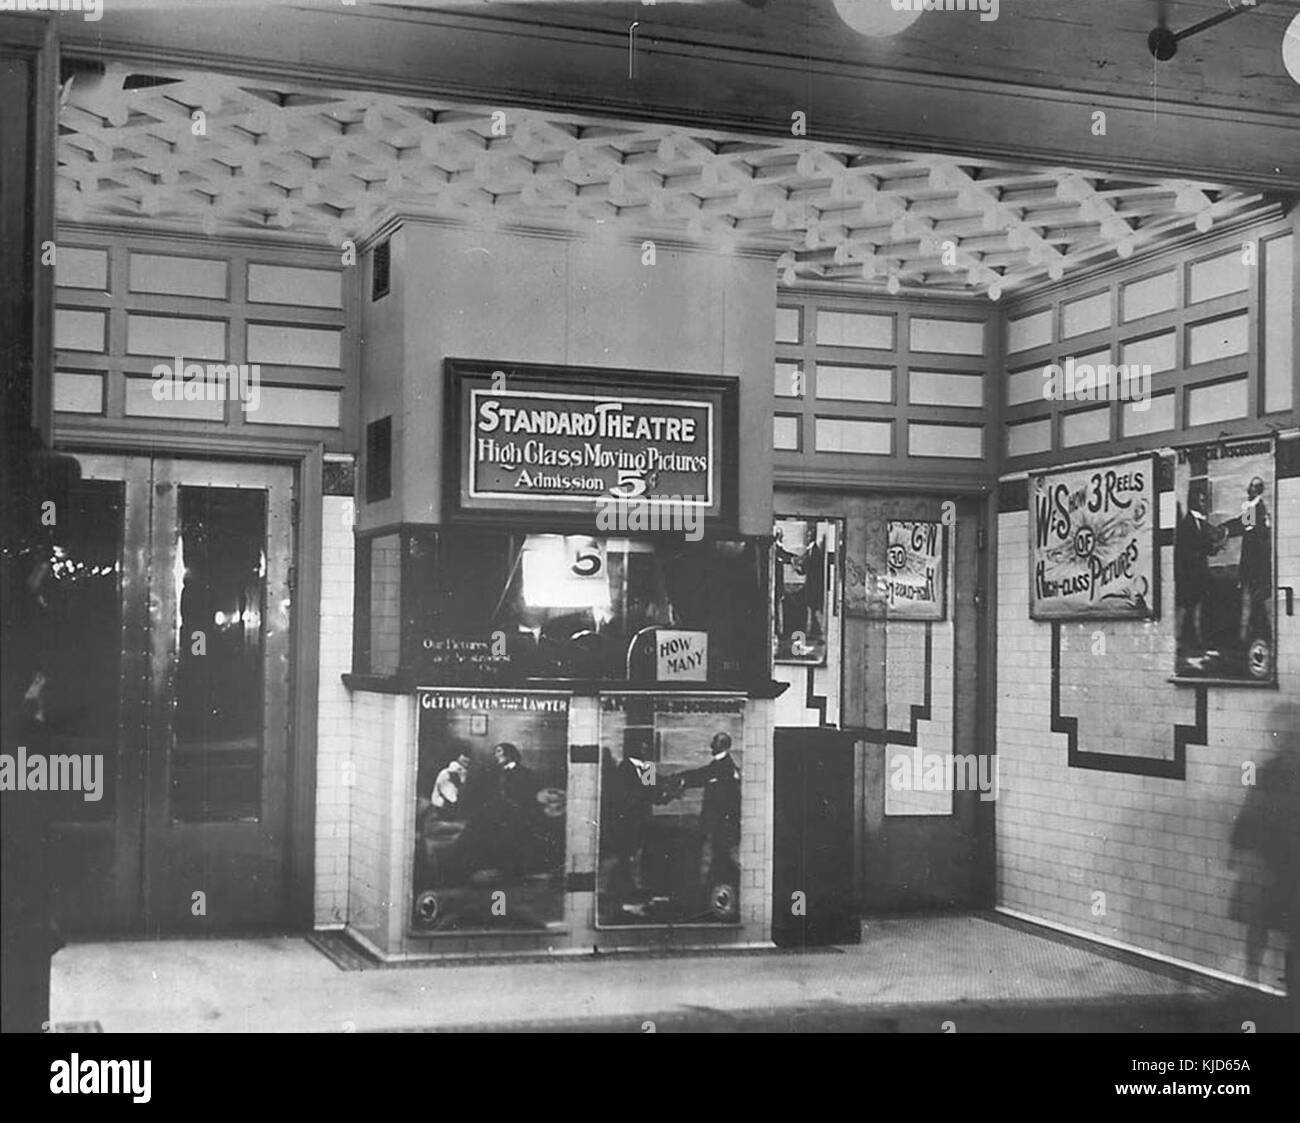 Stanford Theatre a 482 Queen Street Foto Stock